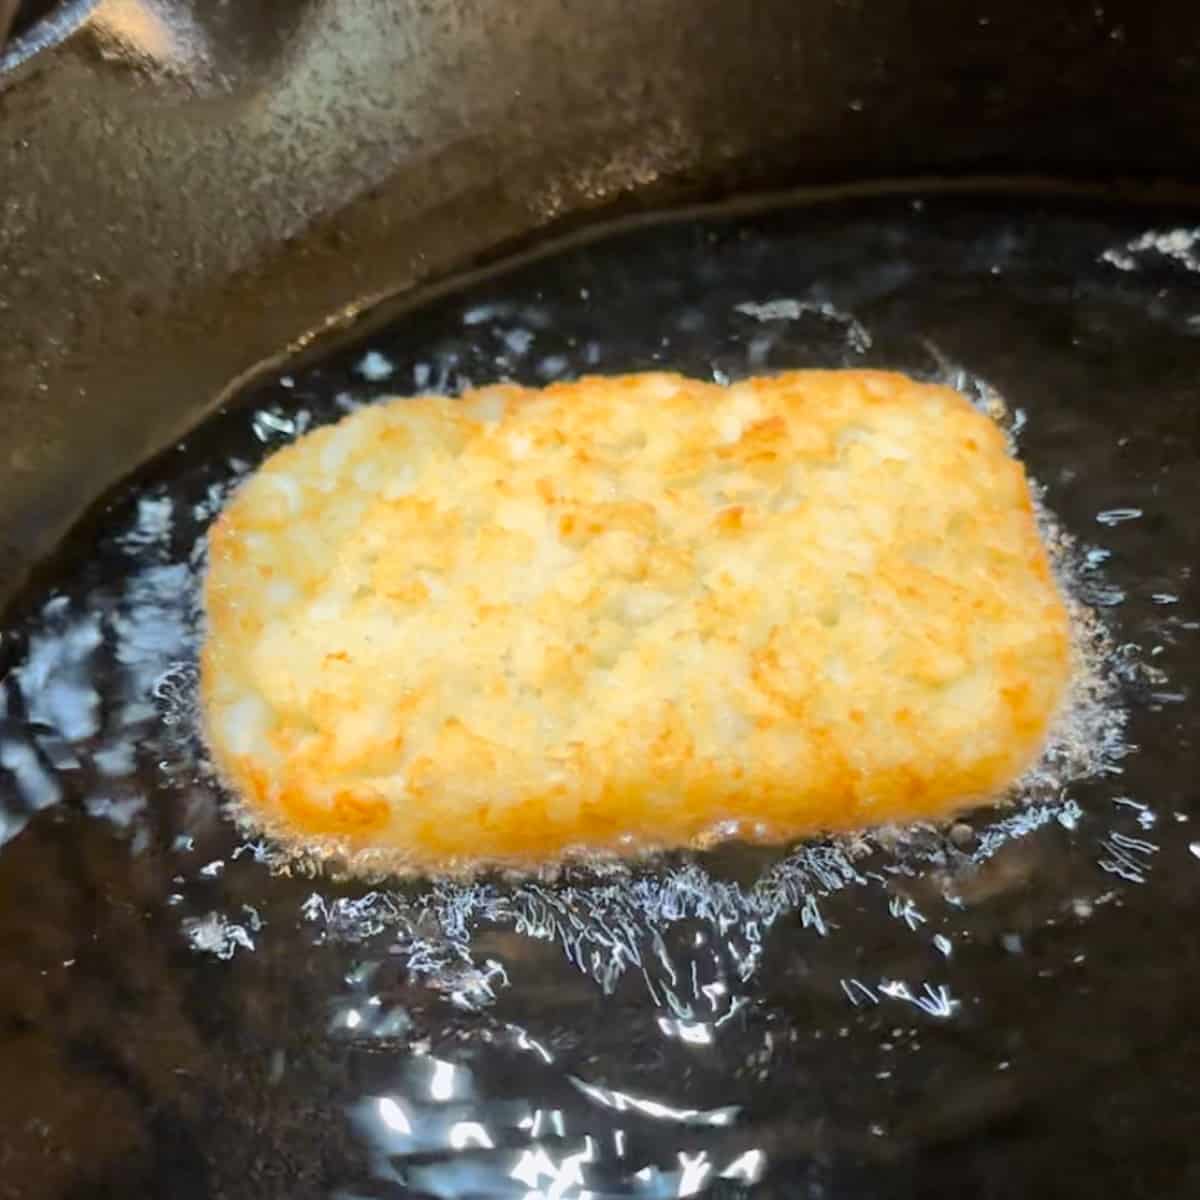 shallow frying a hash brown patty in a cast iron pan.